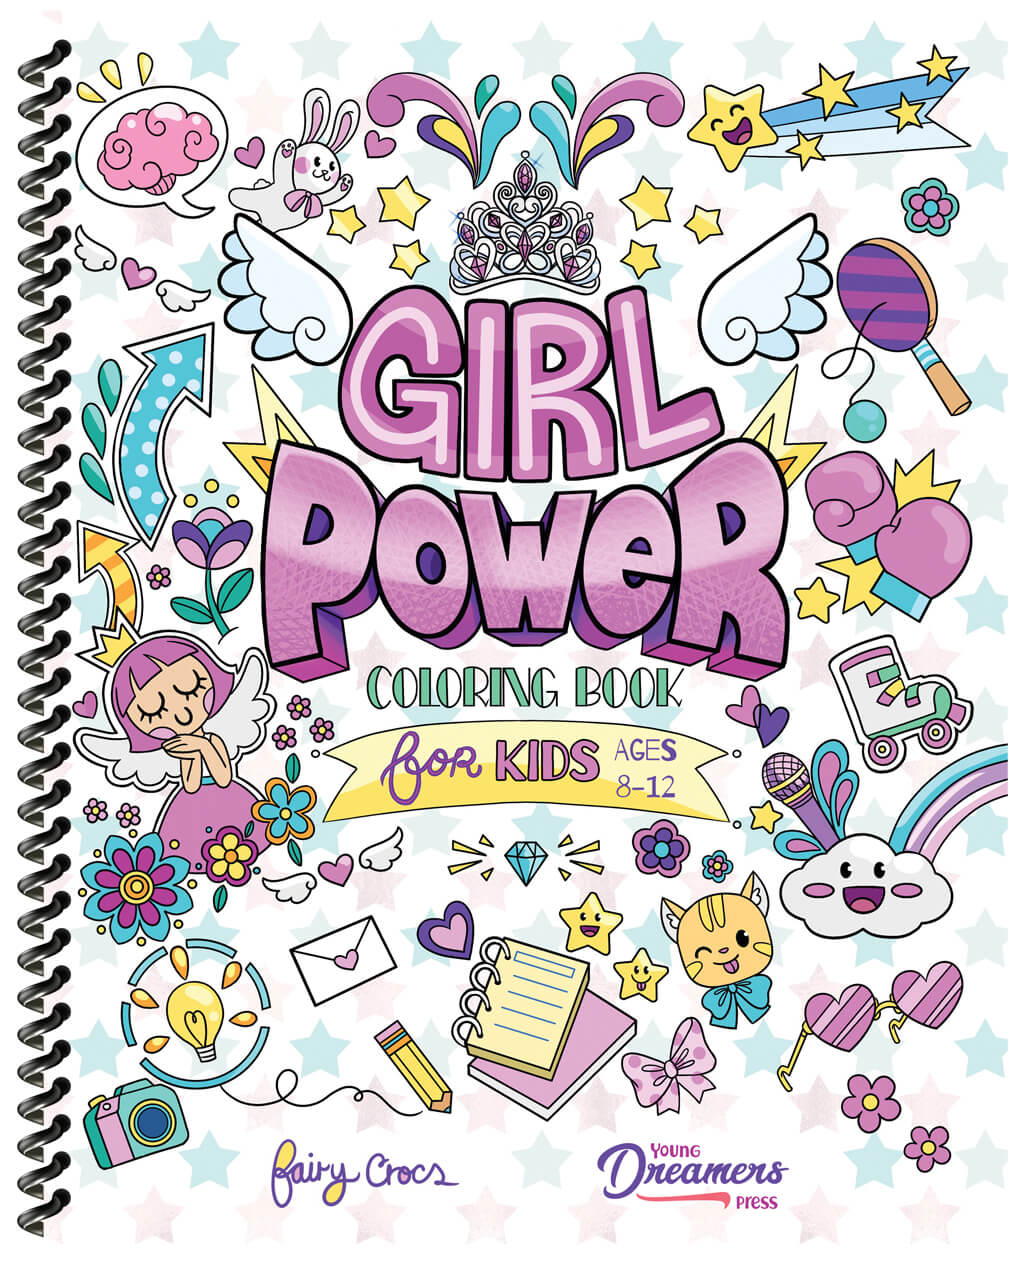 I am Strong: Inspirational Coloring Book for girls age 8-12 and